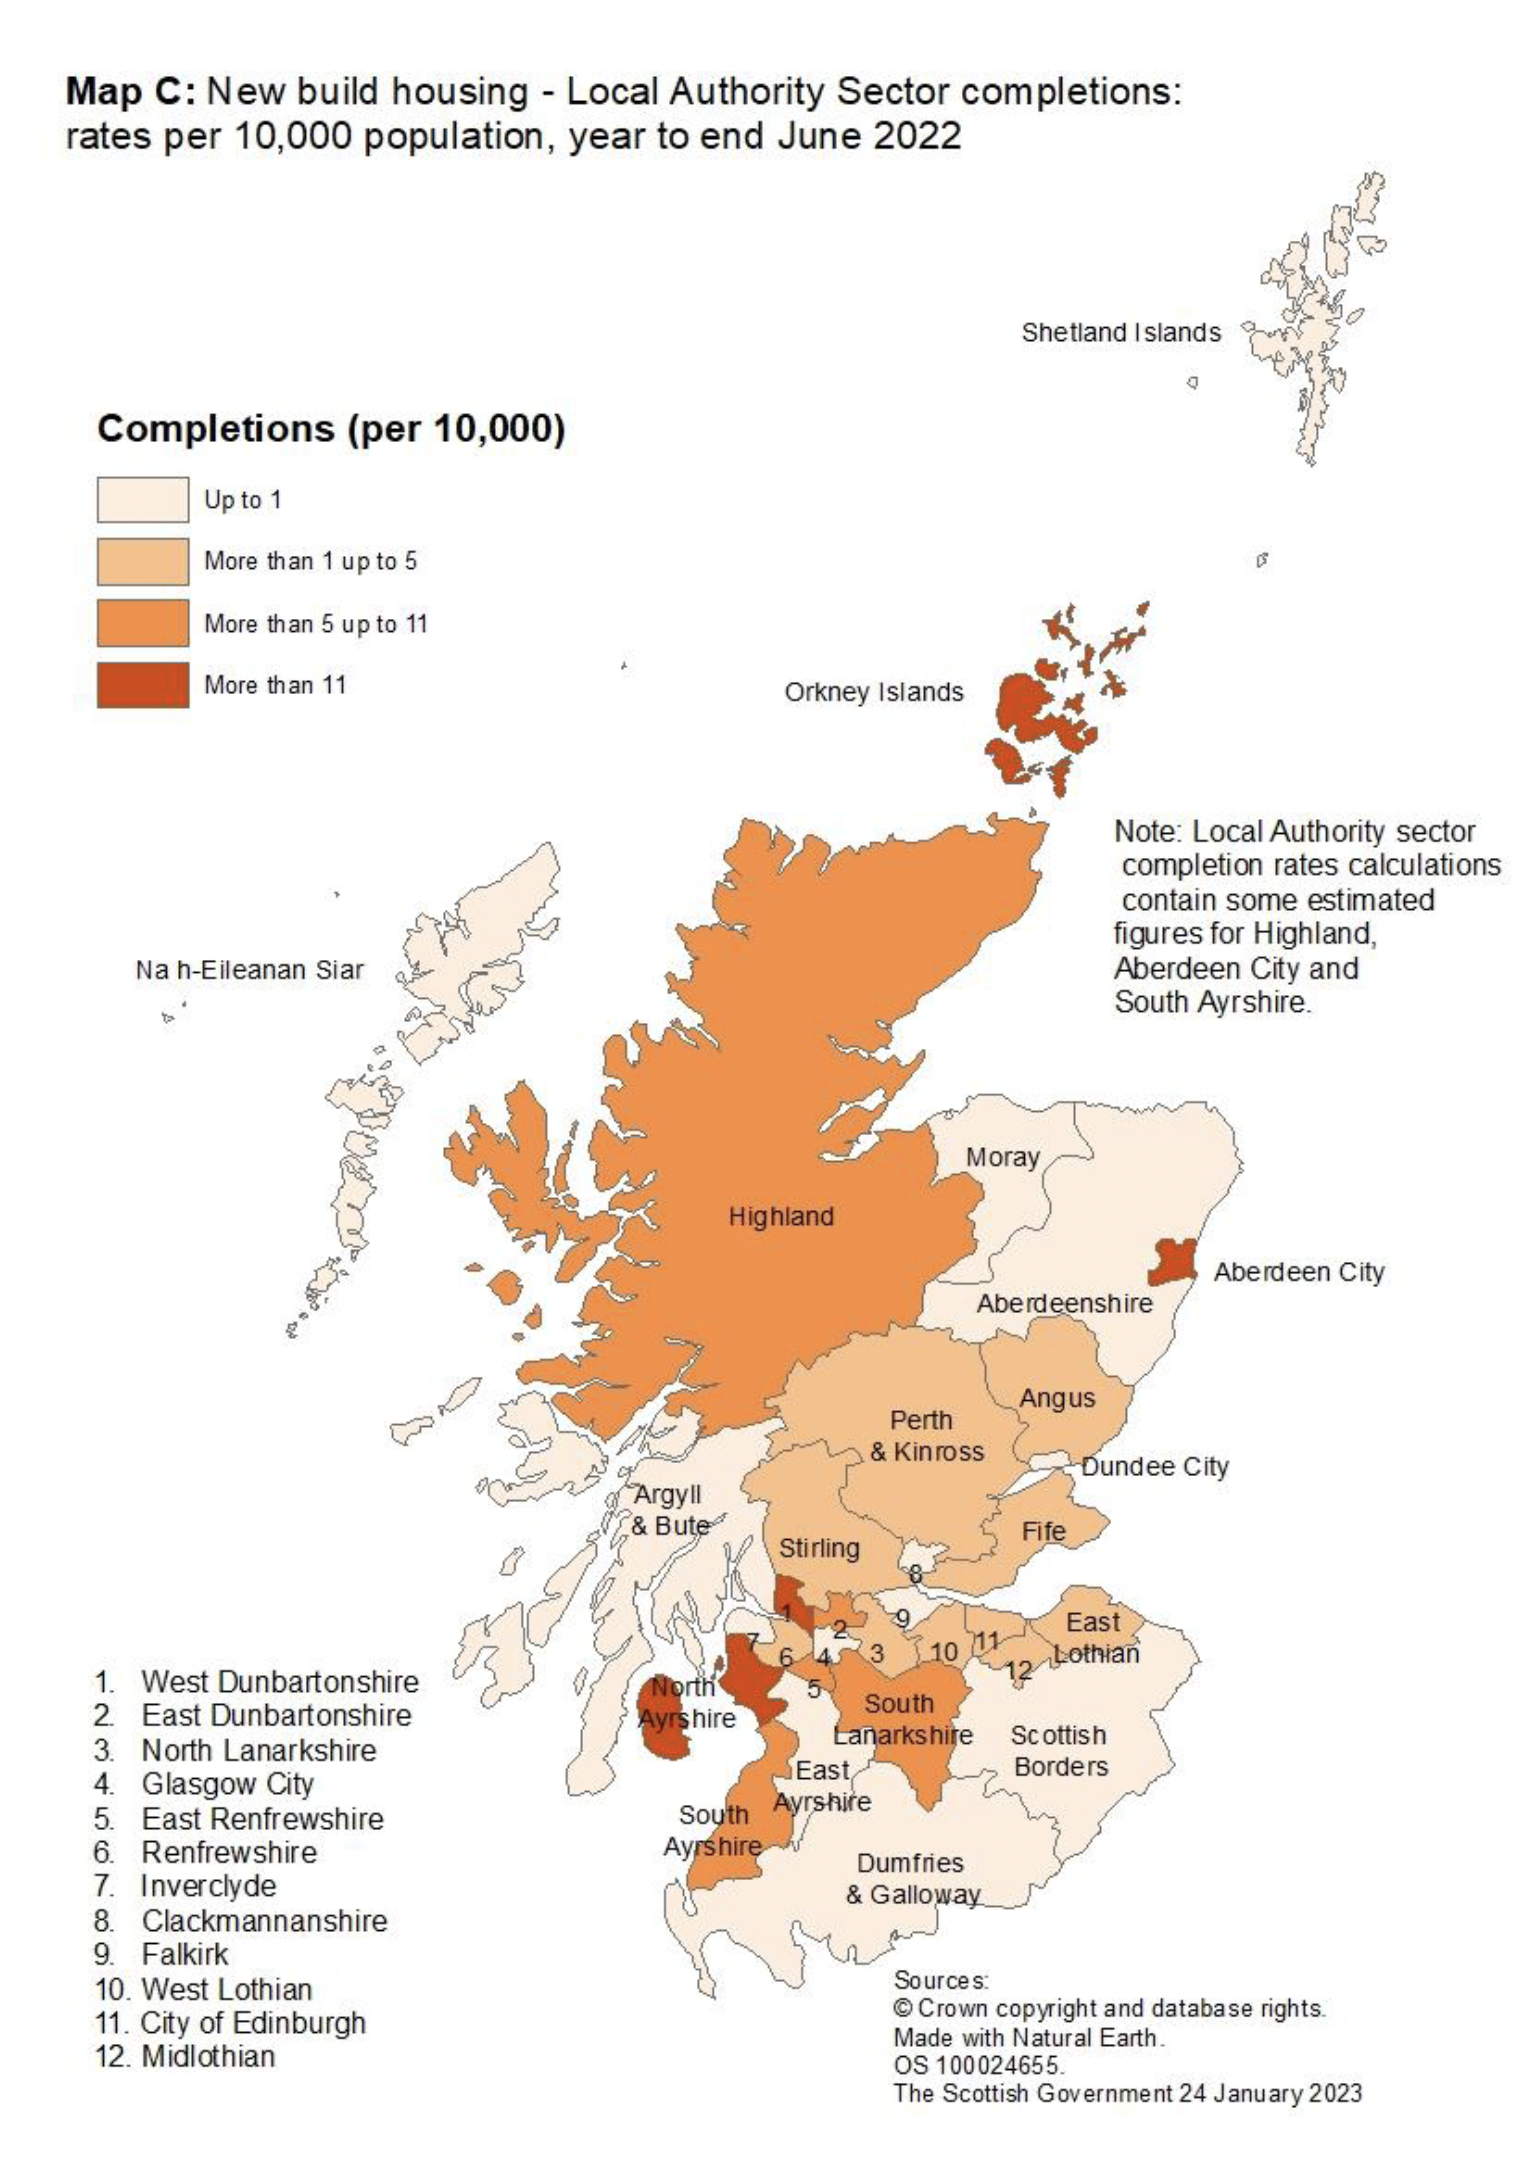 Map C: New build housing – A map of local authority areas in Scotland showing local authority completion rates per 10,000 population for year to end June 2022. The highest rates were observed in West Dunbartonshire, Aberdeen City, Orkney Islands, and North Ayrshire. There were no completions in Aberdeenshire, Clackmannanshire, Dundee City, East Ayrshire, Moray and the Shetland Islands.